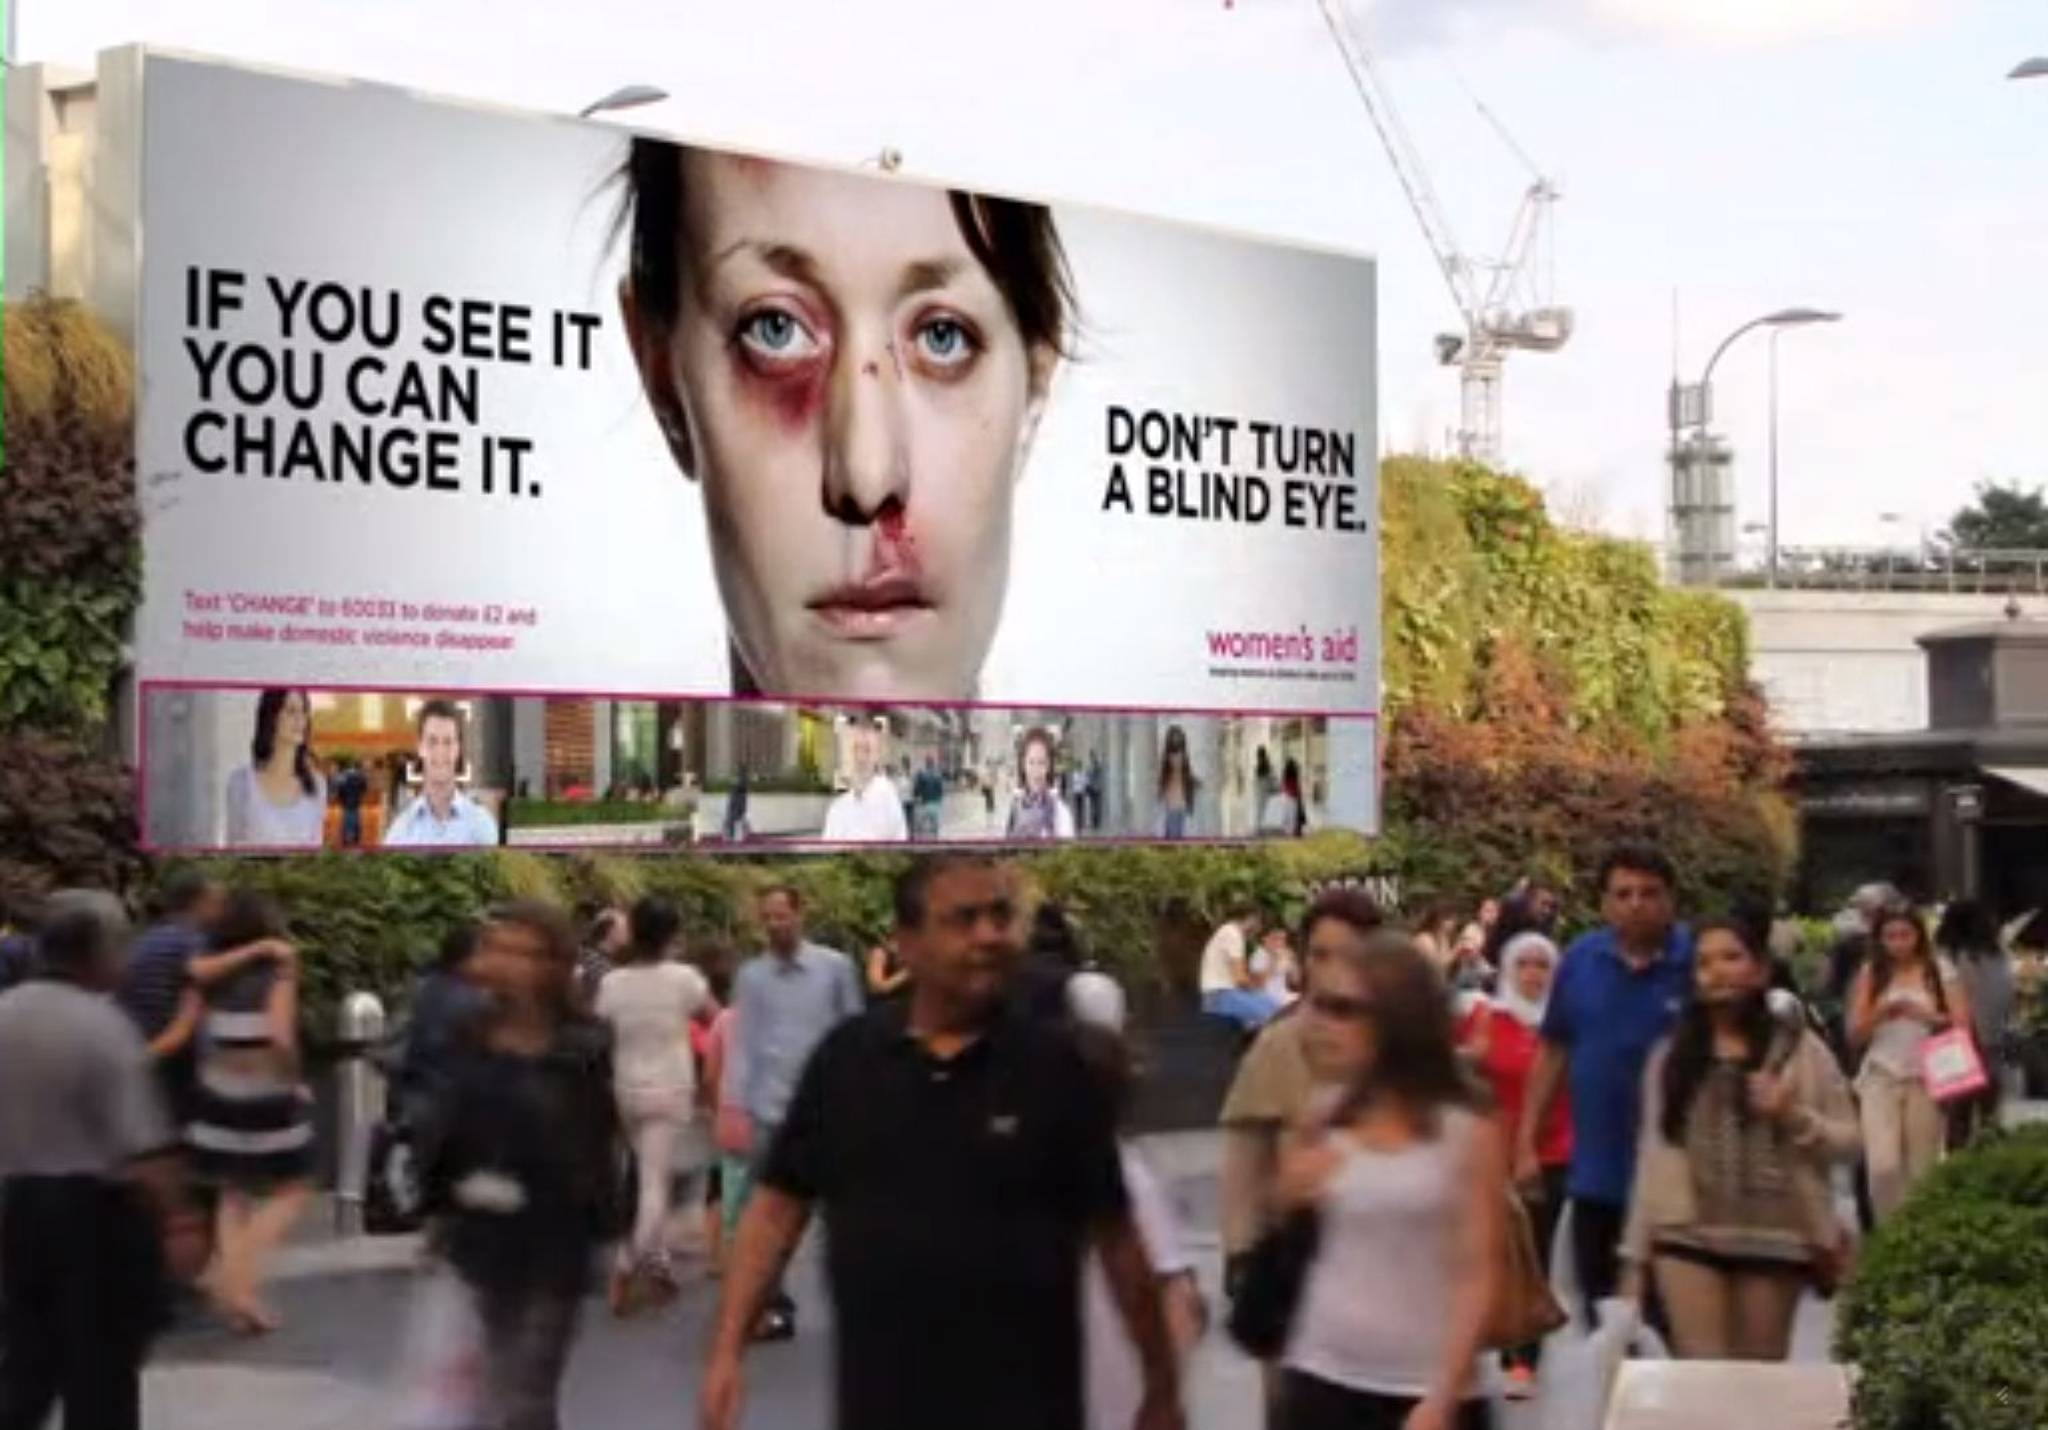 A billboard that reacts when you look at it